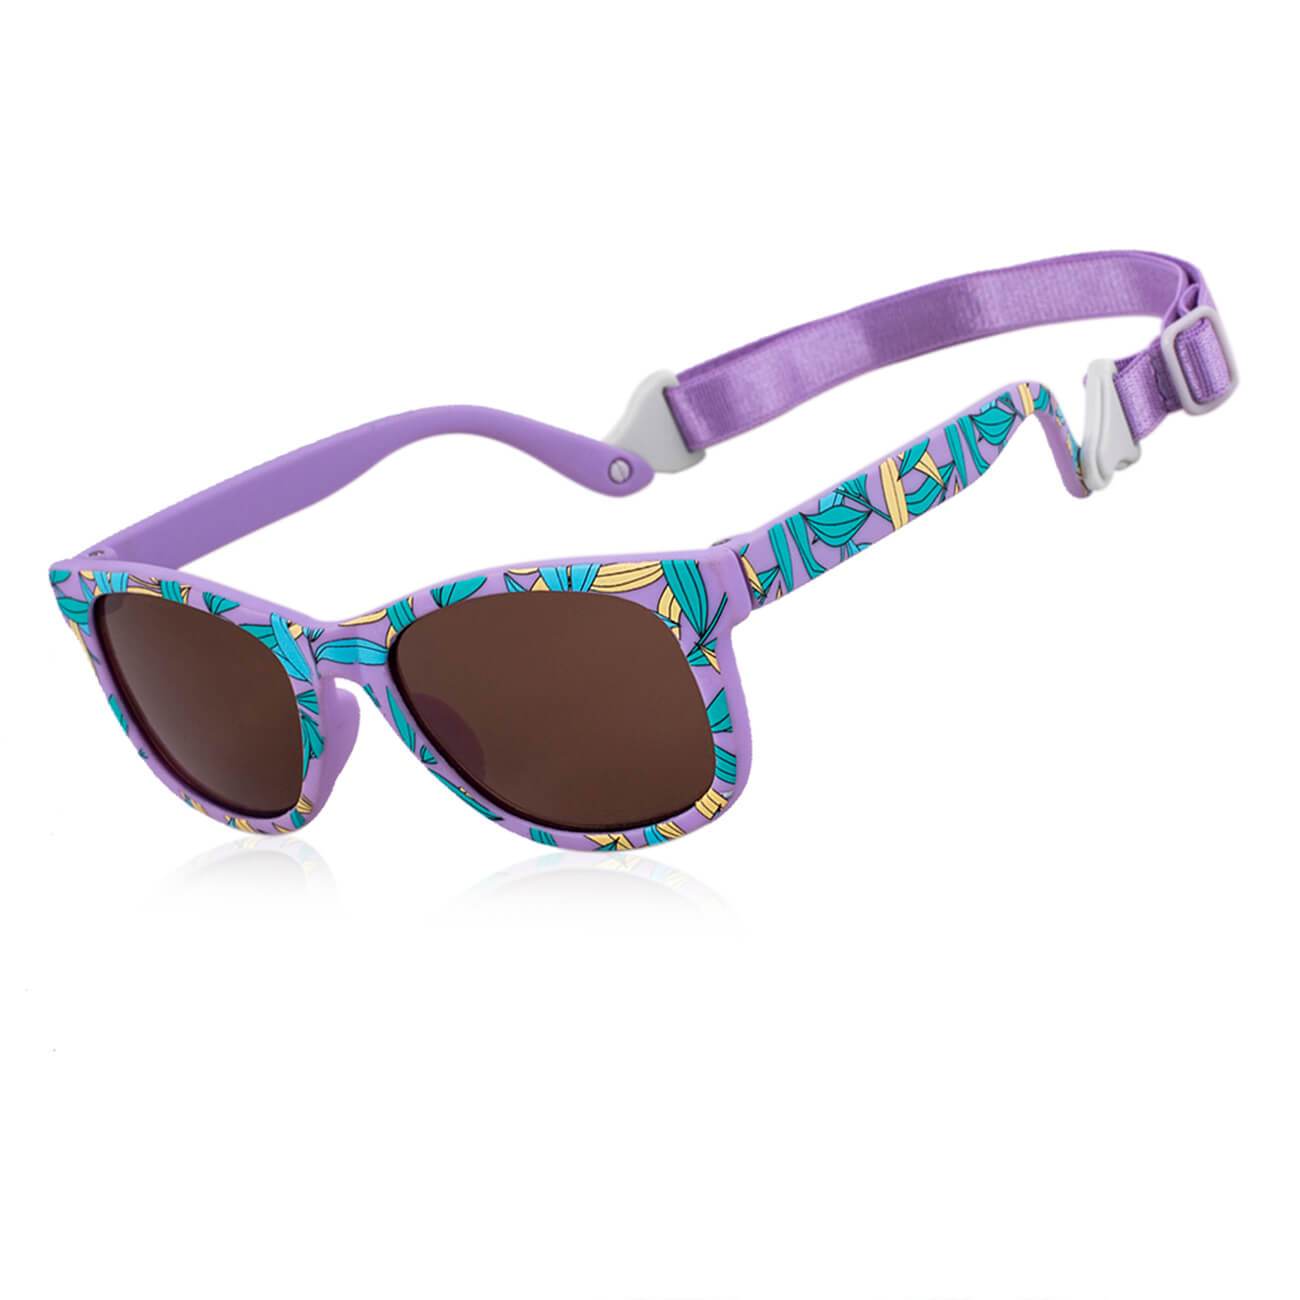 Baby Toddler Bueller Shades UV beach Sunglasses With Strap-W45-purple